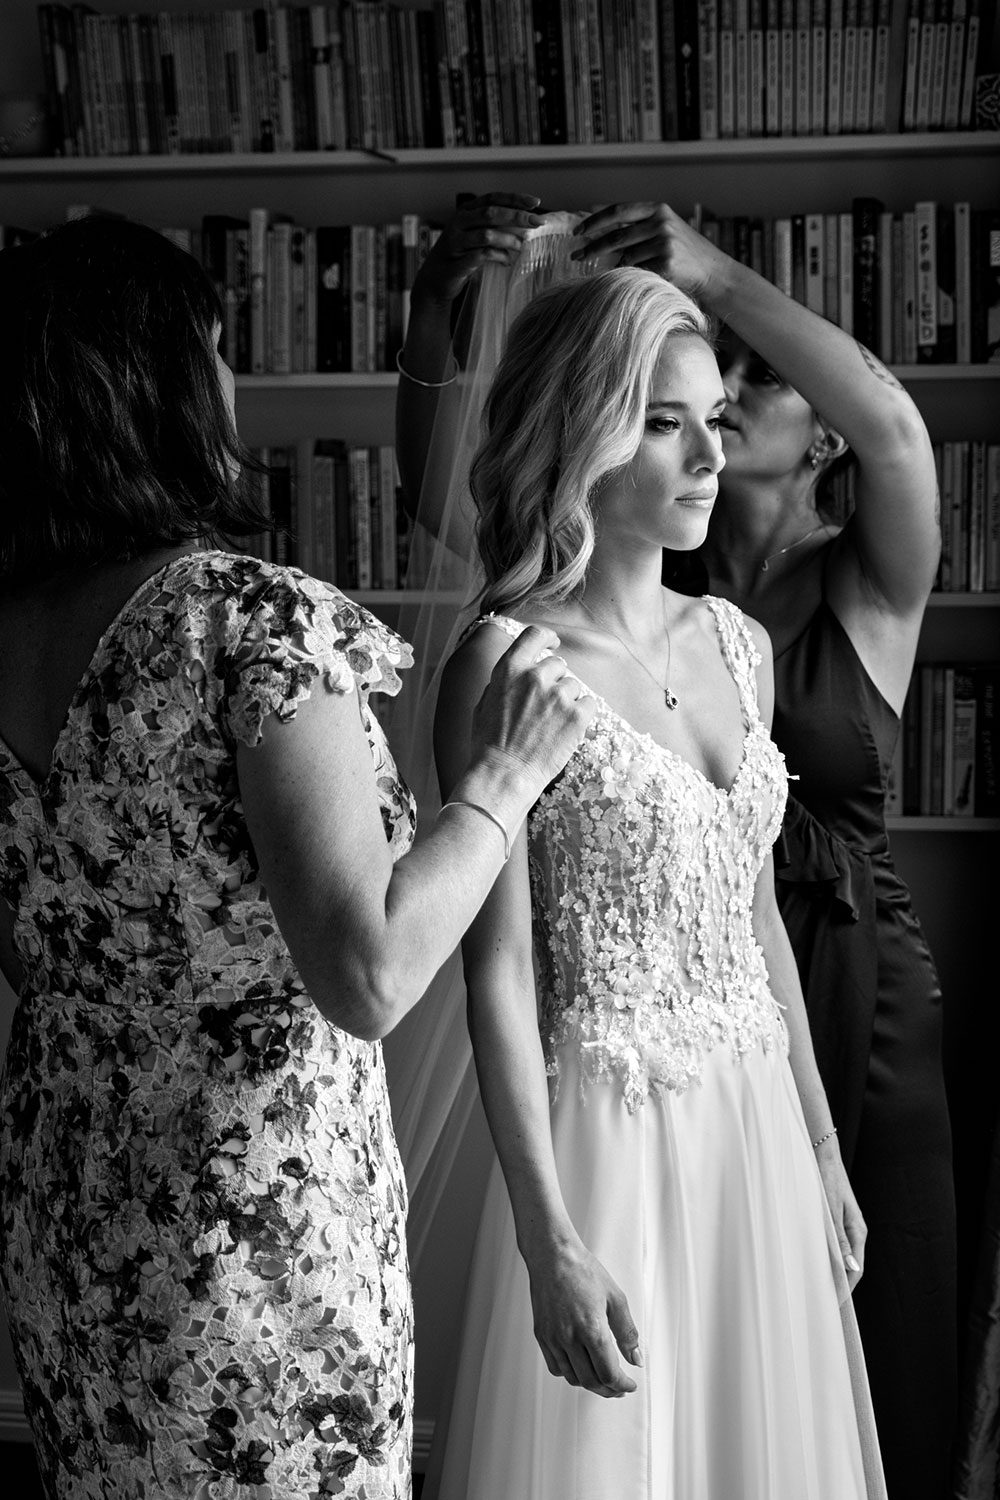 Bride wearing bespoke gown made of silk chiffon with delicate flower lace bodice by Vinka bridal designer Auckland - black and white getting ready